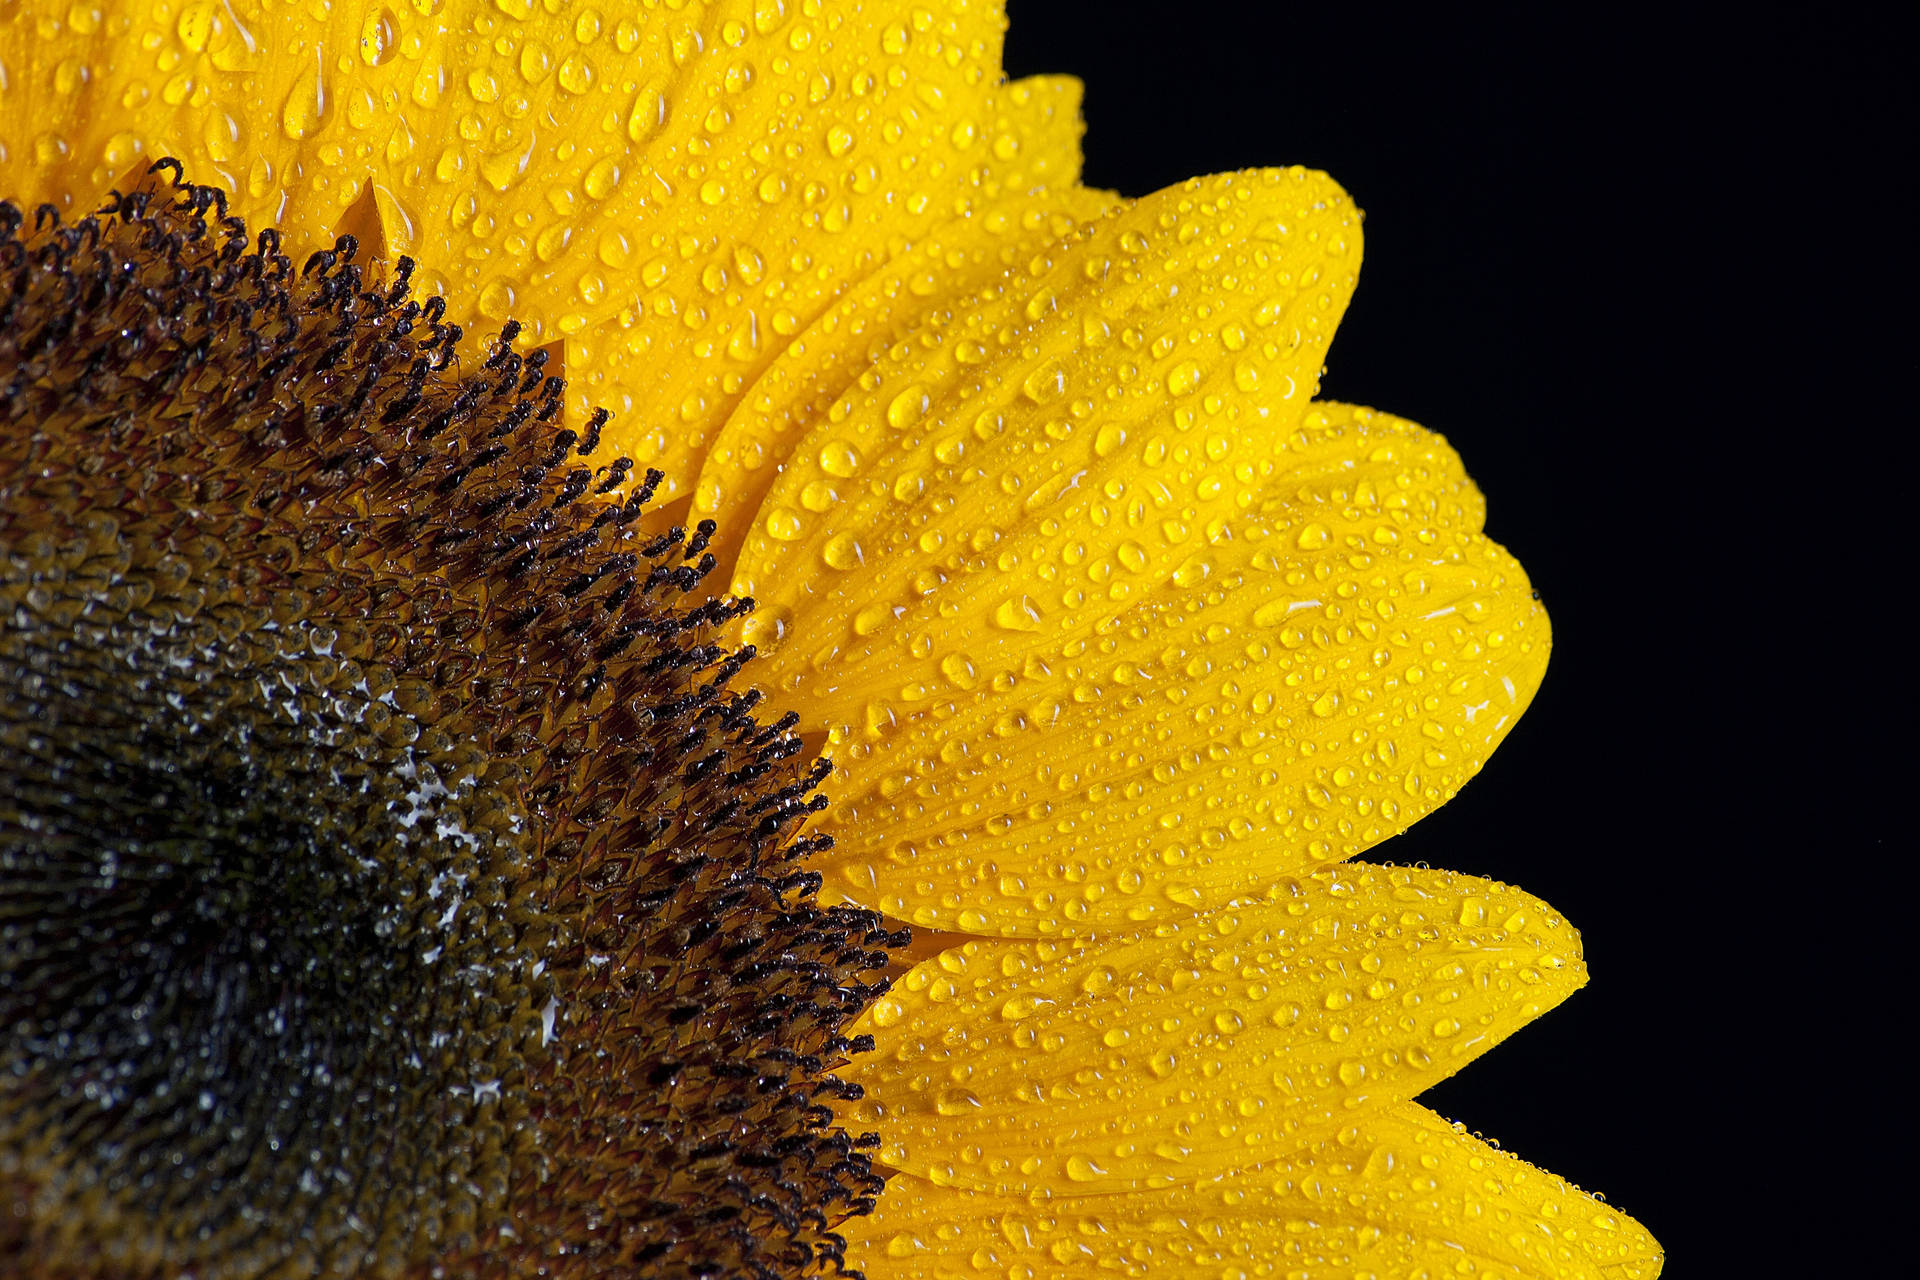 A brilliant yellow Sunflower standing tall, shining bright in the summer sun with a few glistening water droplets still clinging to its petals. Wallpaper